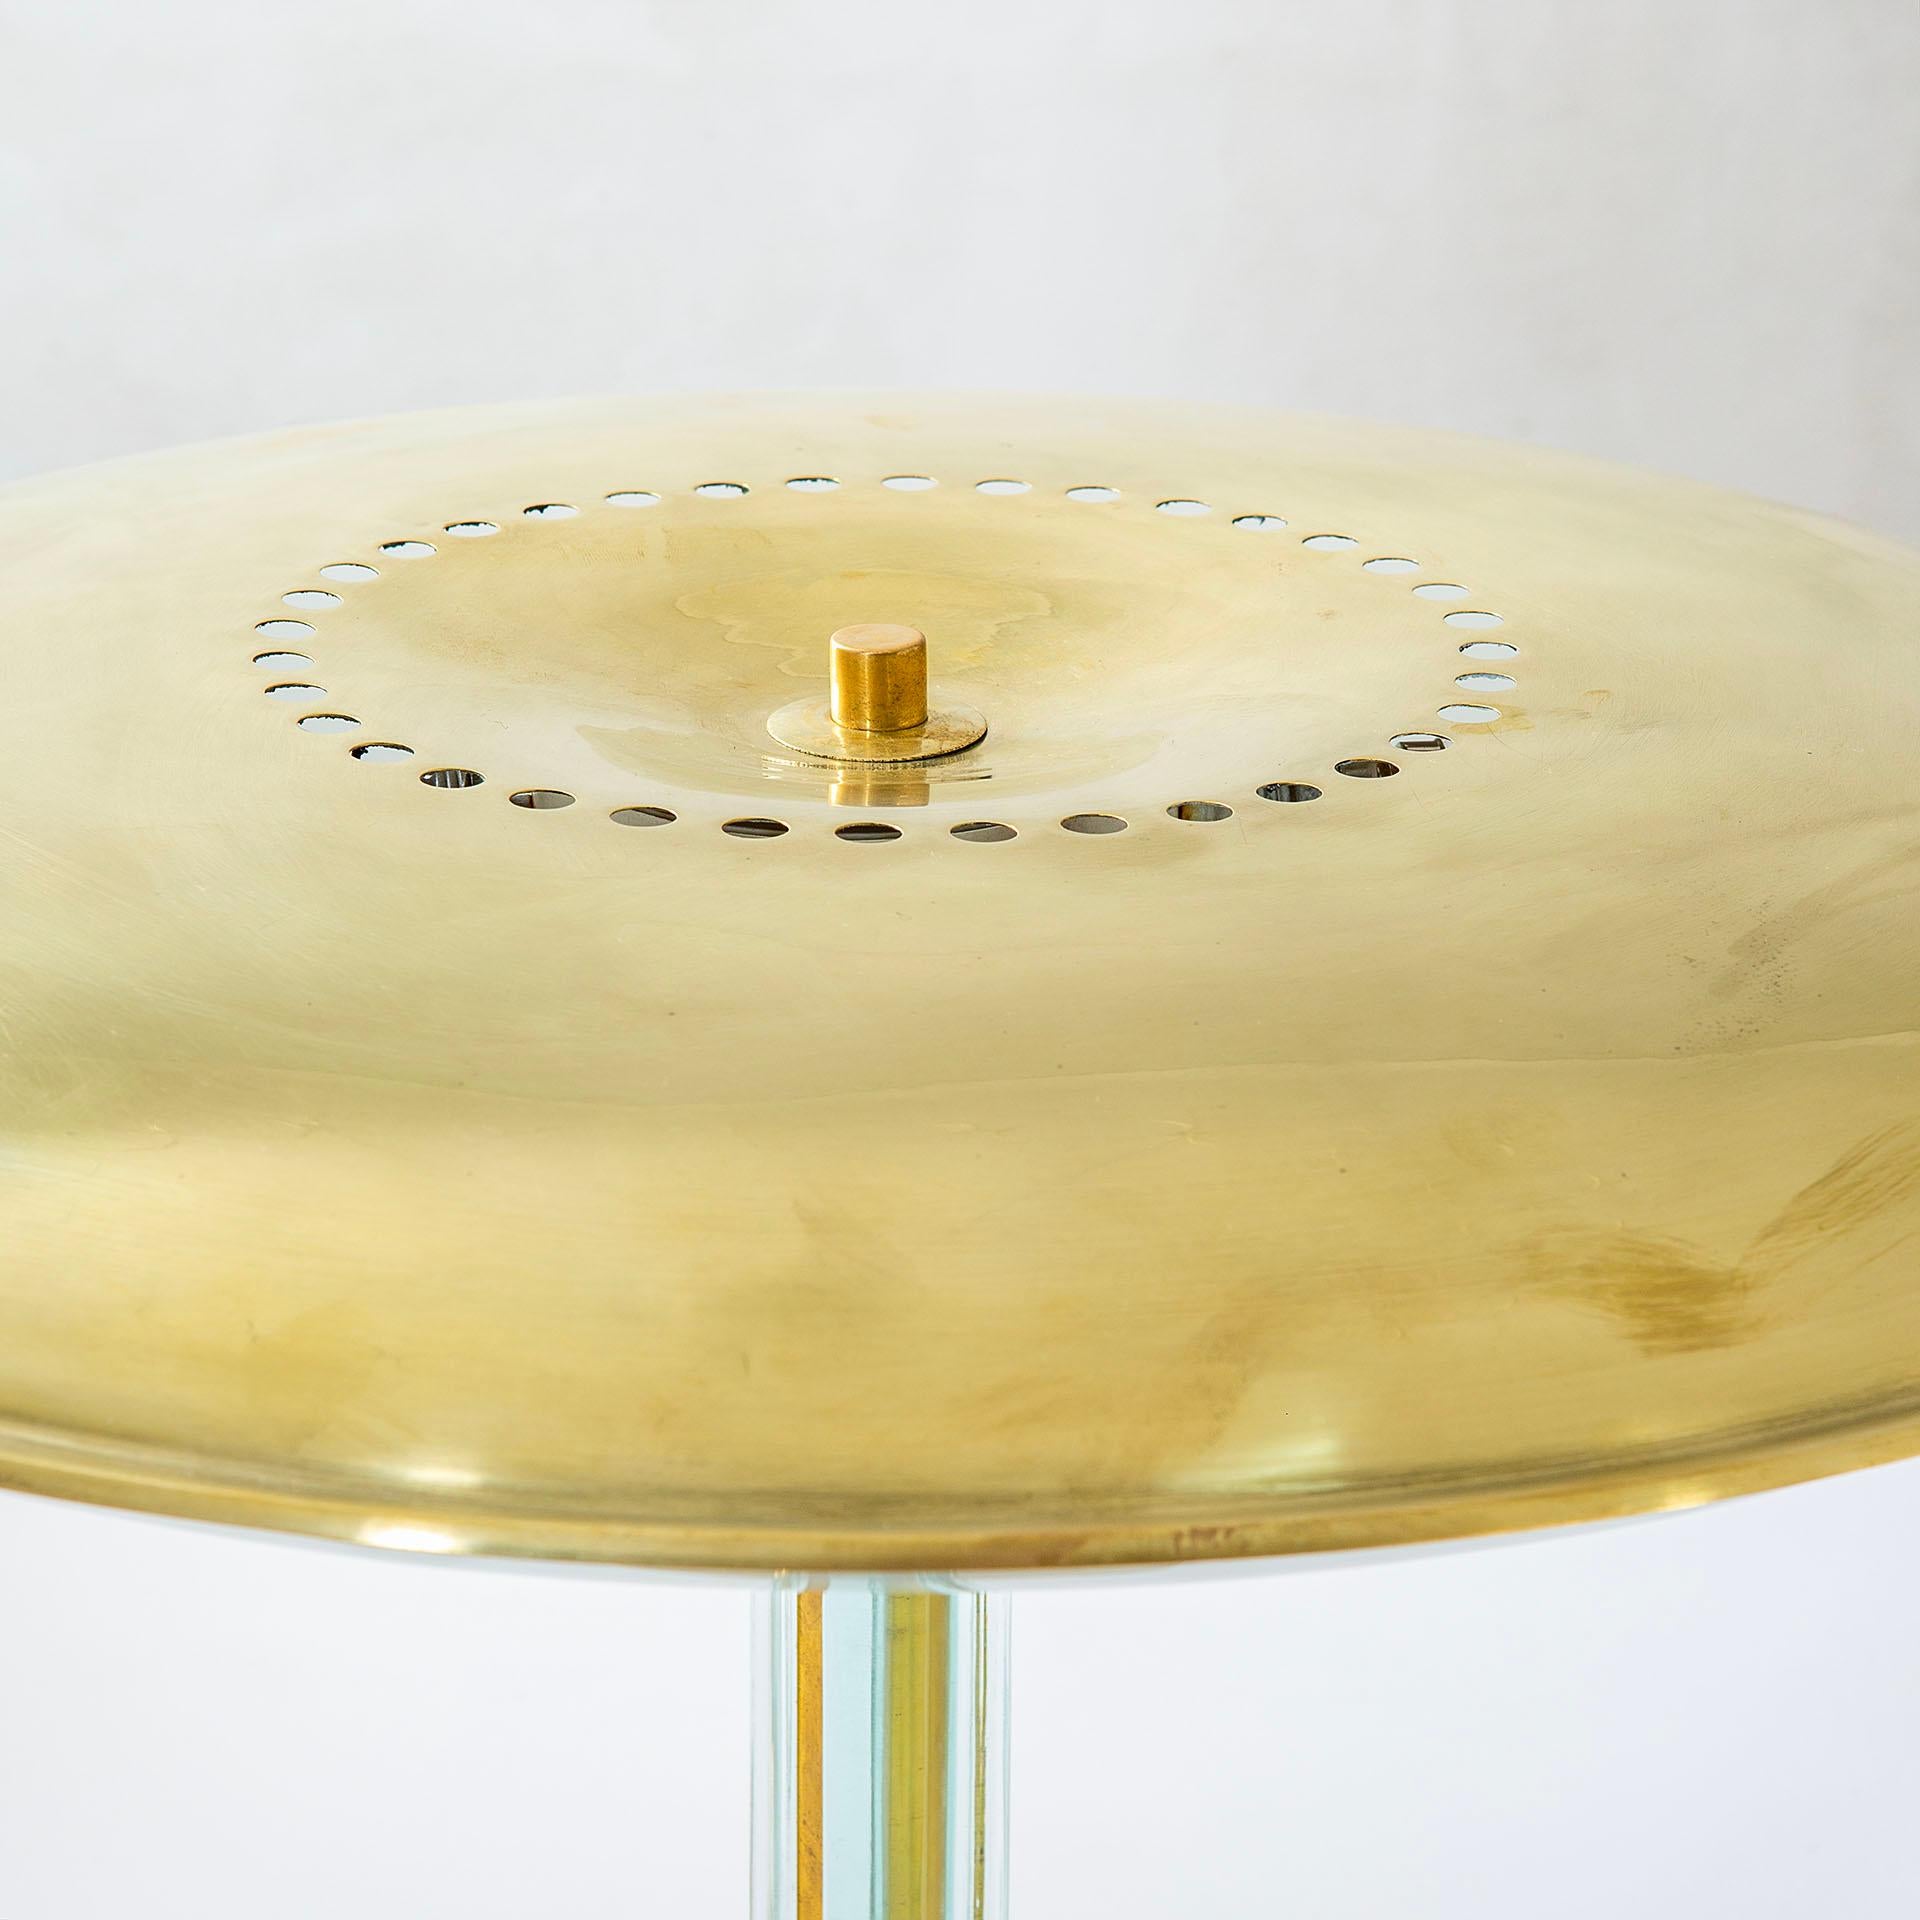 Italian 20th Century Pietro Chiesa Table Lamp in Glass and Brass for Fontana Arte, 40s For Sale